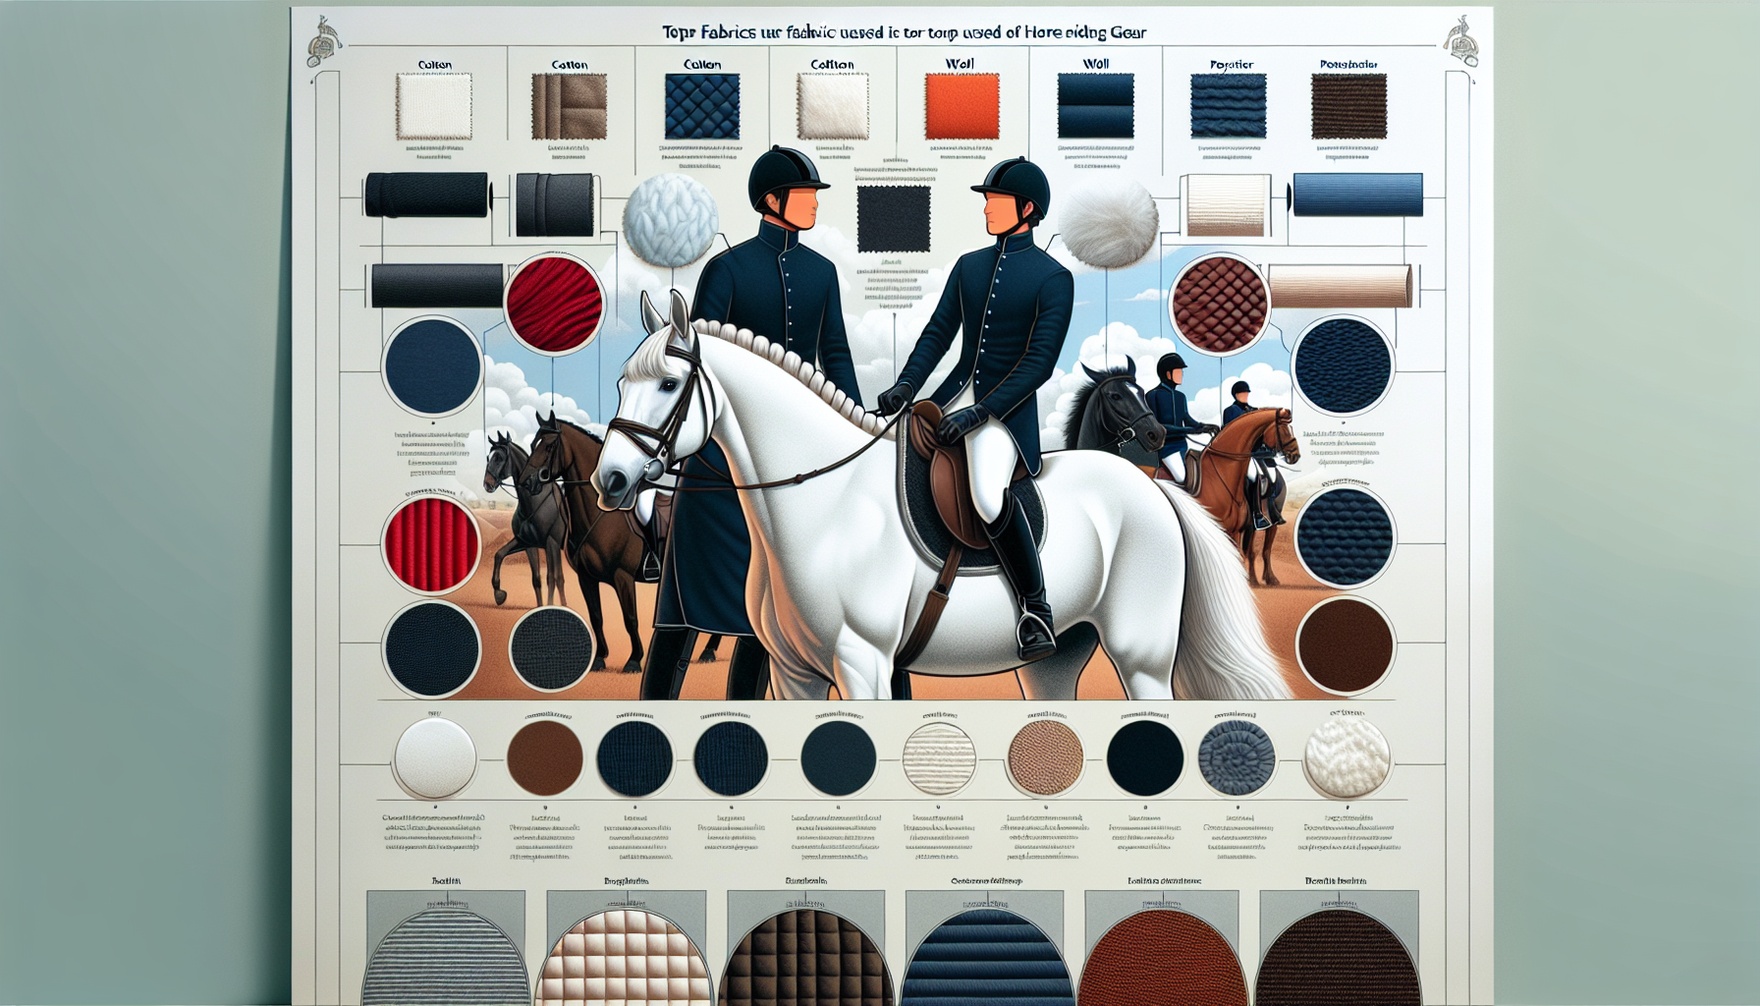 A comprehensive visual poster detailing the top fabrics used in horse riding gear. In this image, various types of fabrics like cotton, wool, polyester, and leather are neatly arranged. Each fabric ty